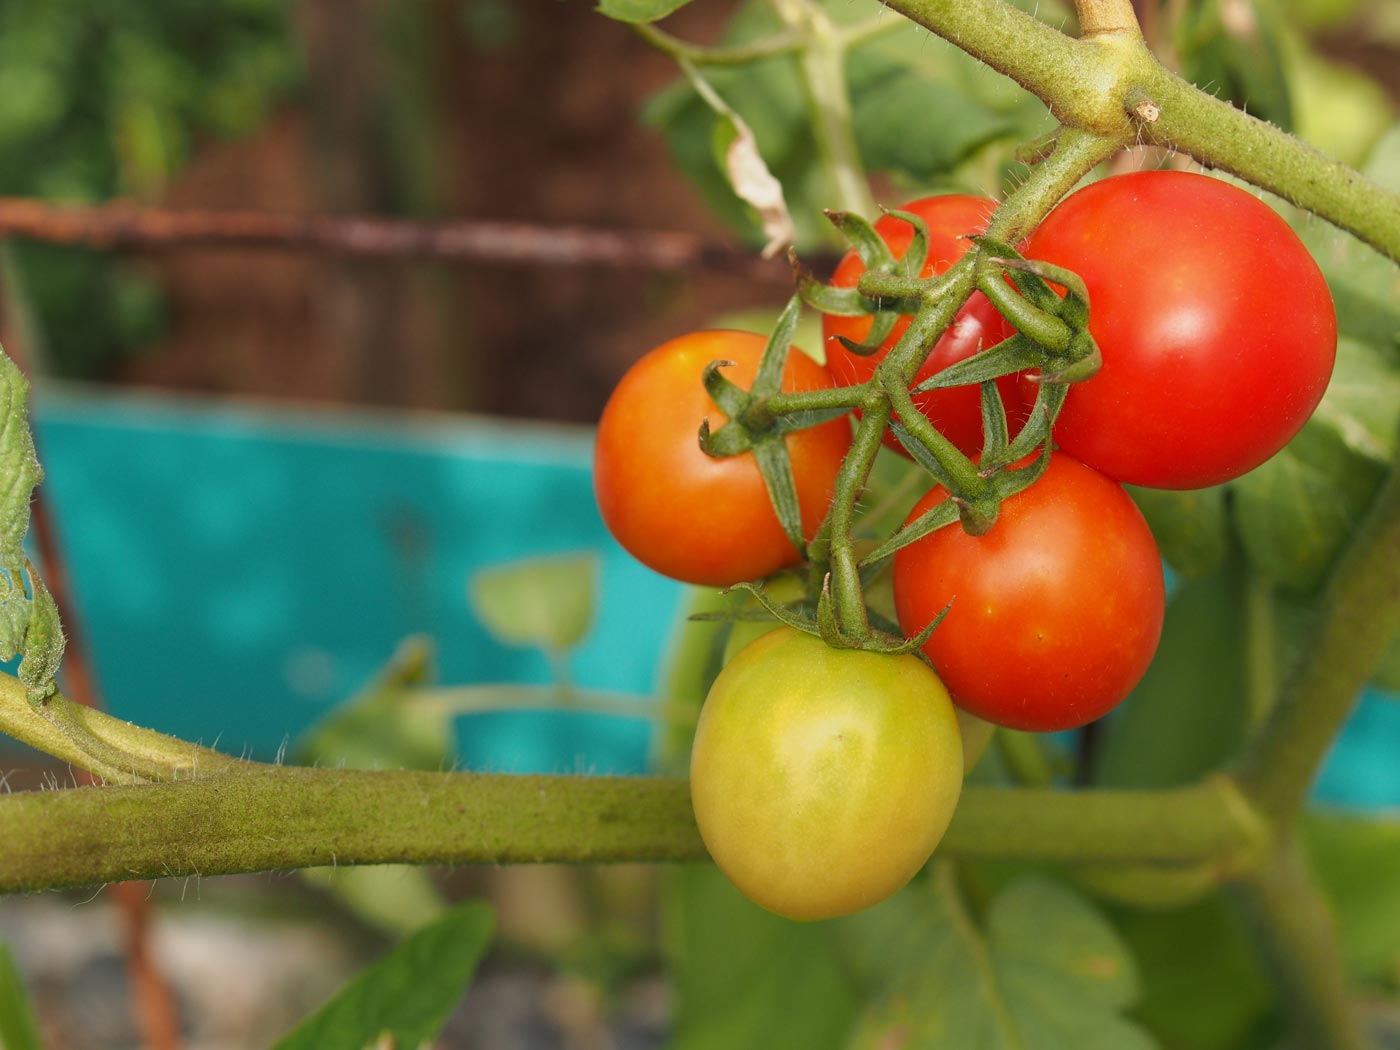 Tomato, Brinjal and Lady's Finger'